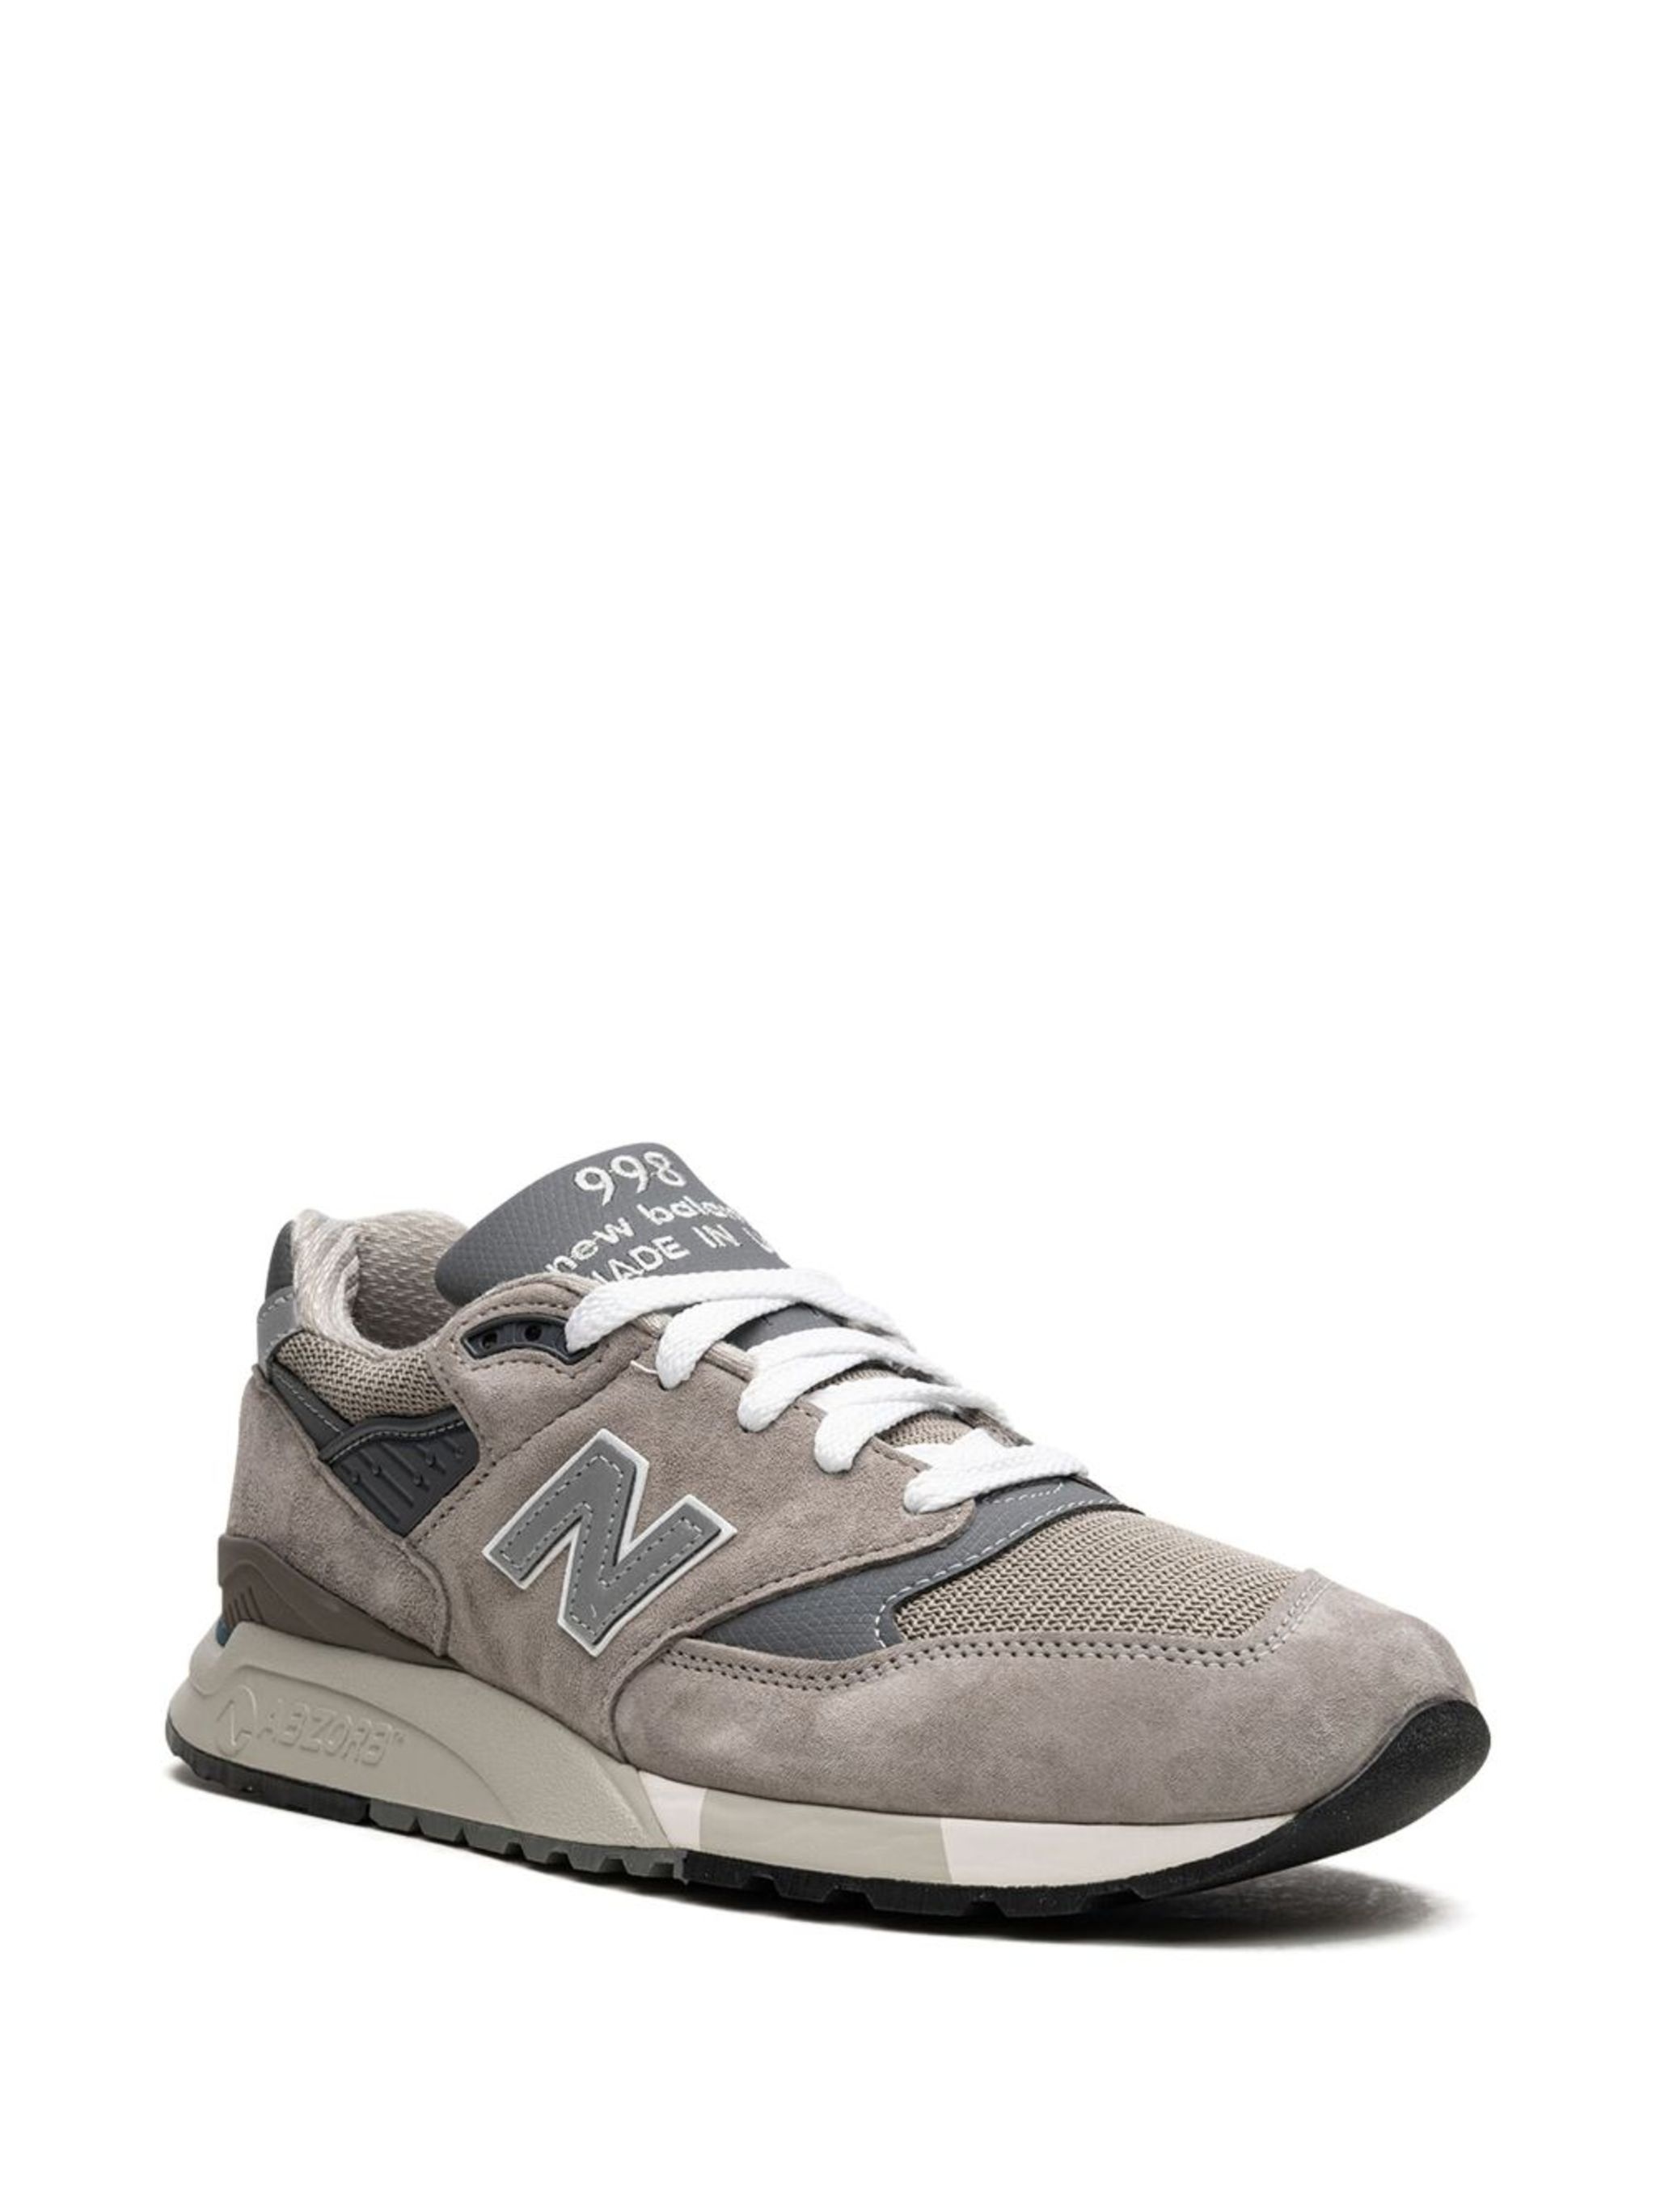 998 "Made in USA - Grey/Silver" sneakers - 2